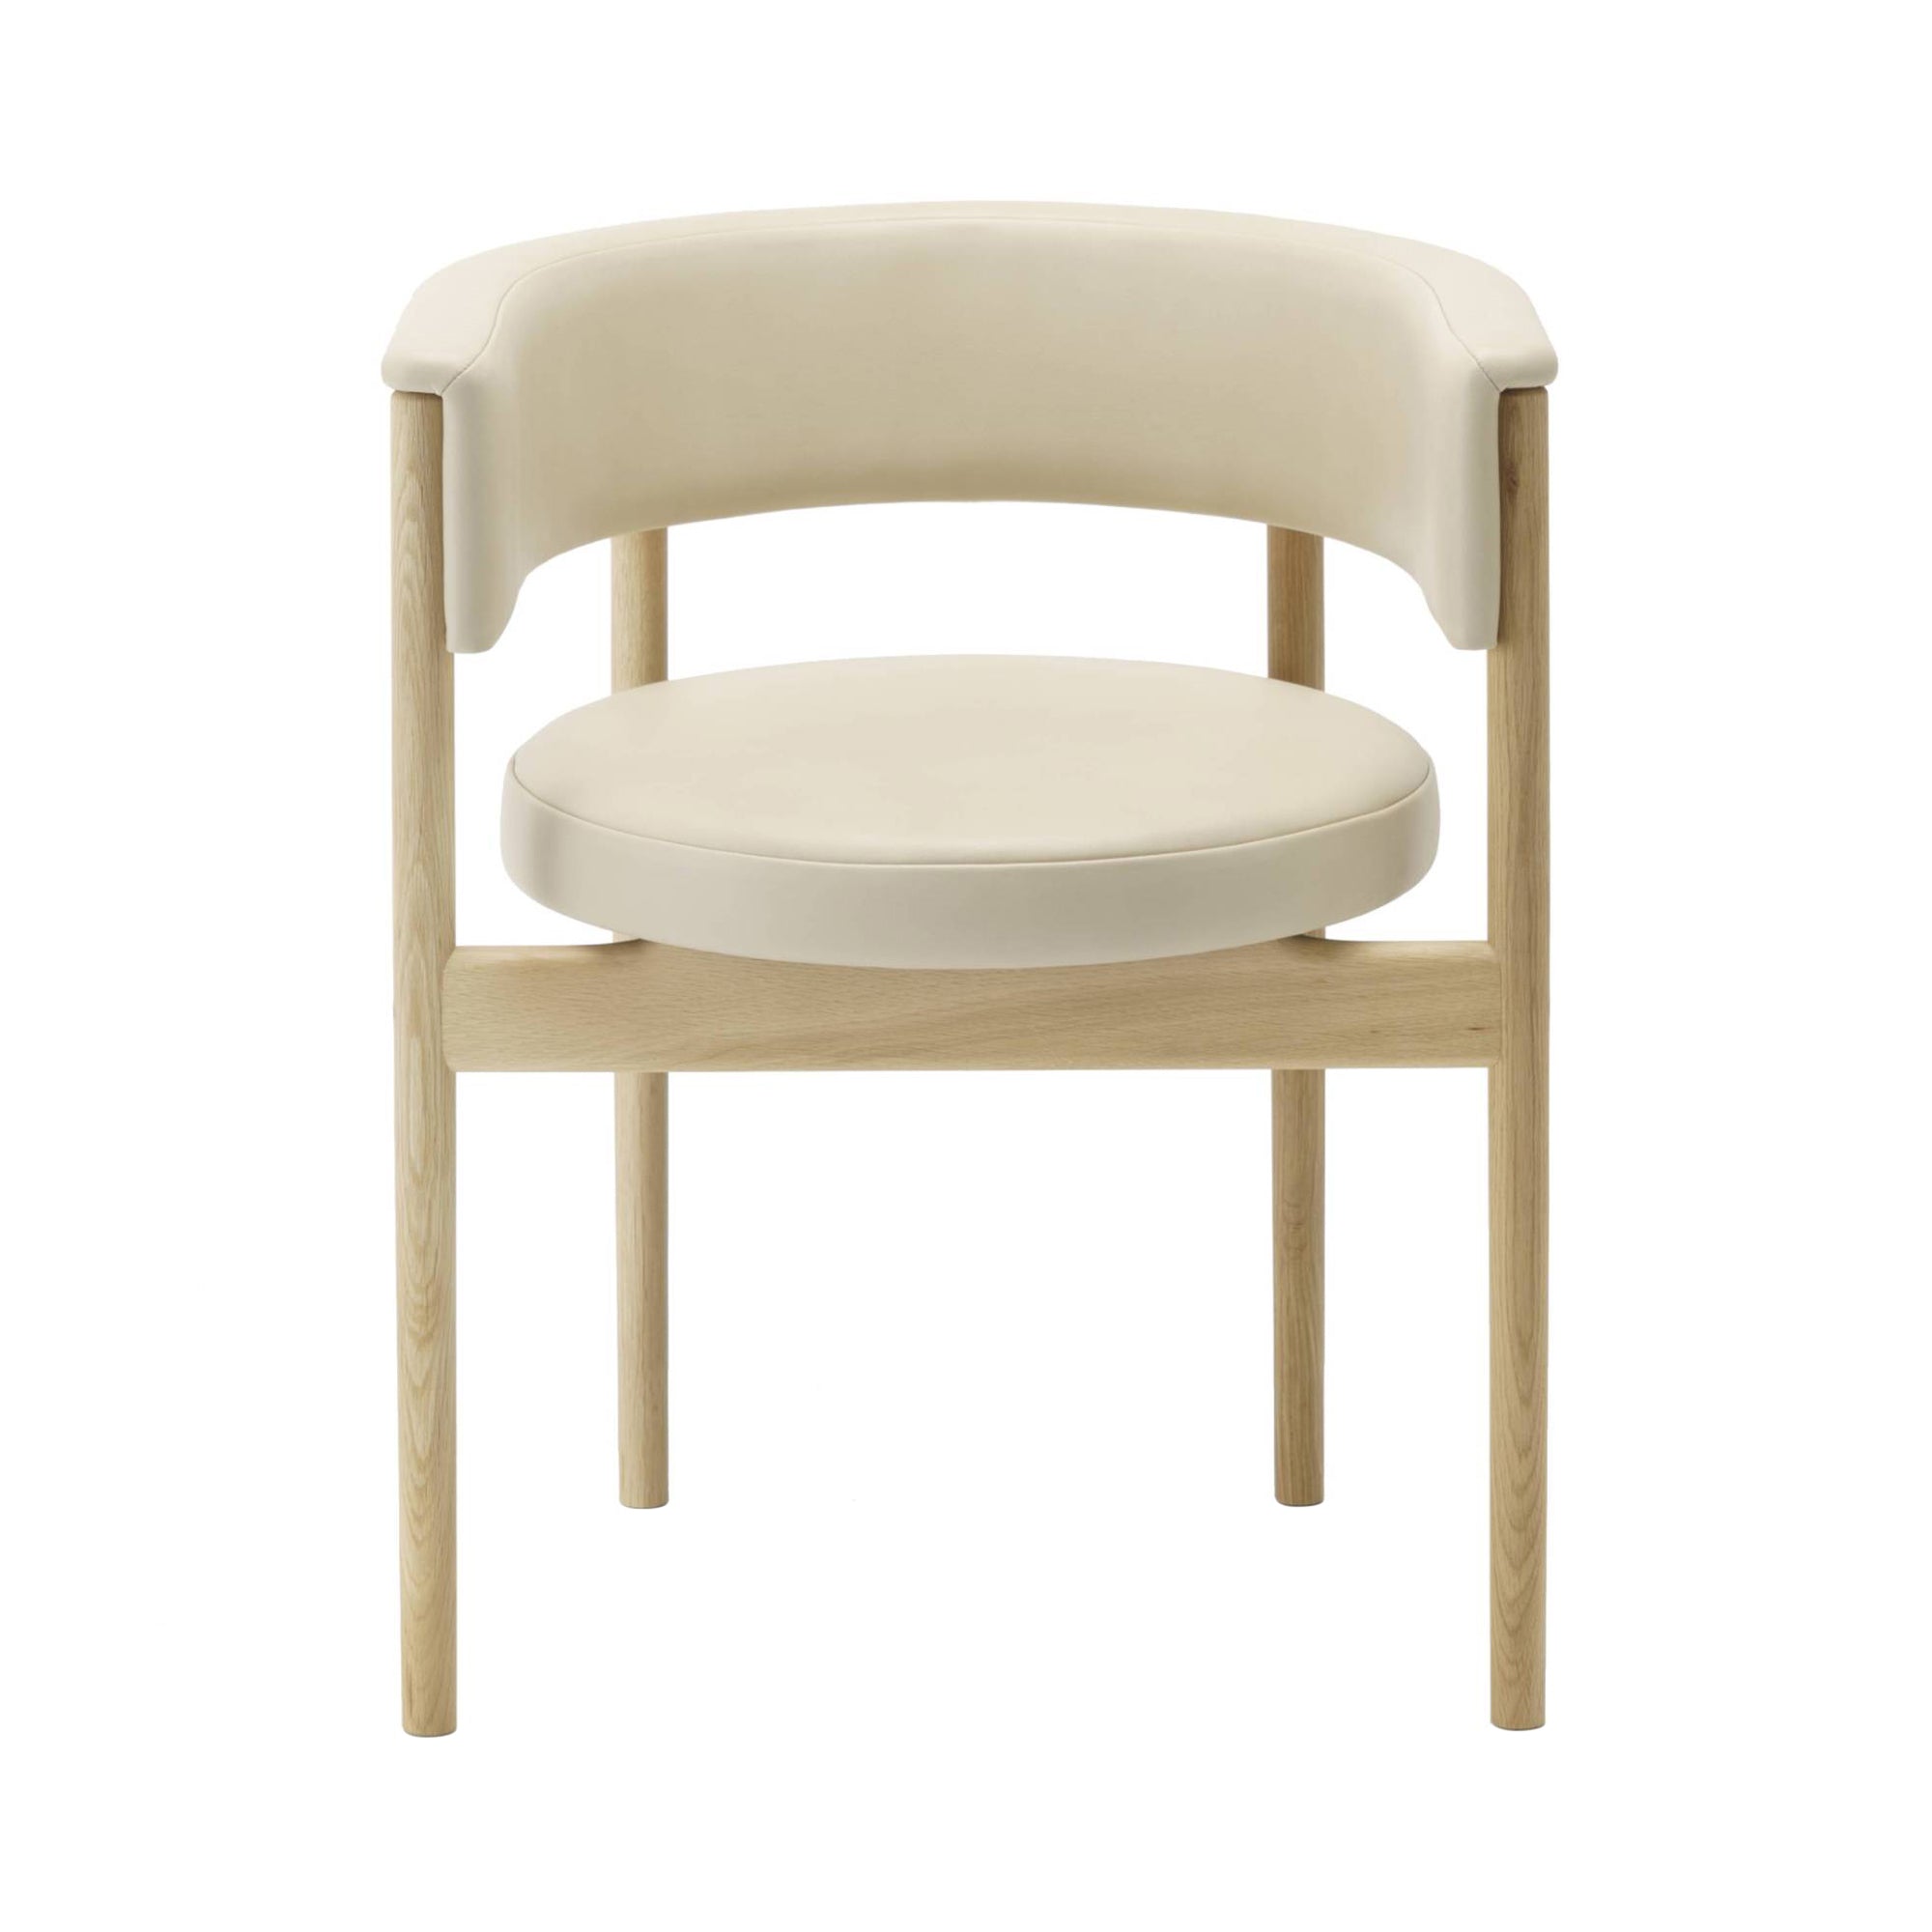 Minatomirai Cafe Side Chair N-SC01: Upholstered